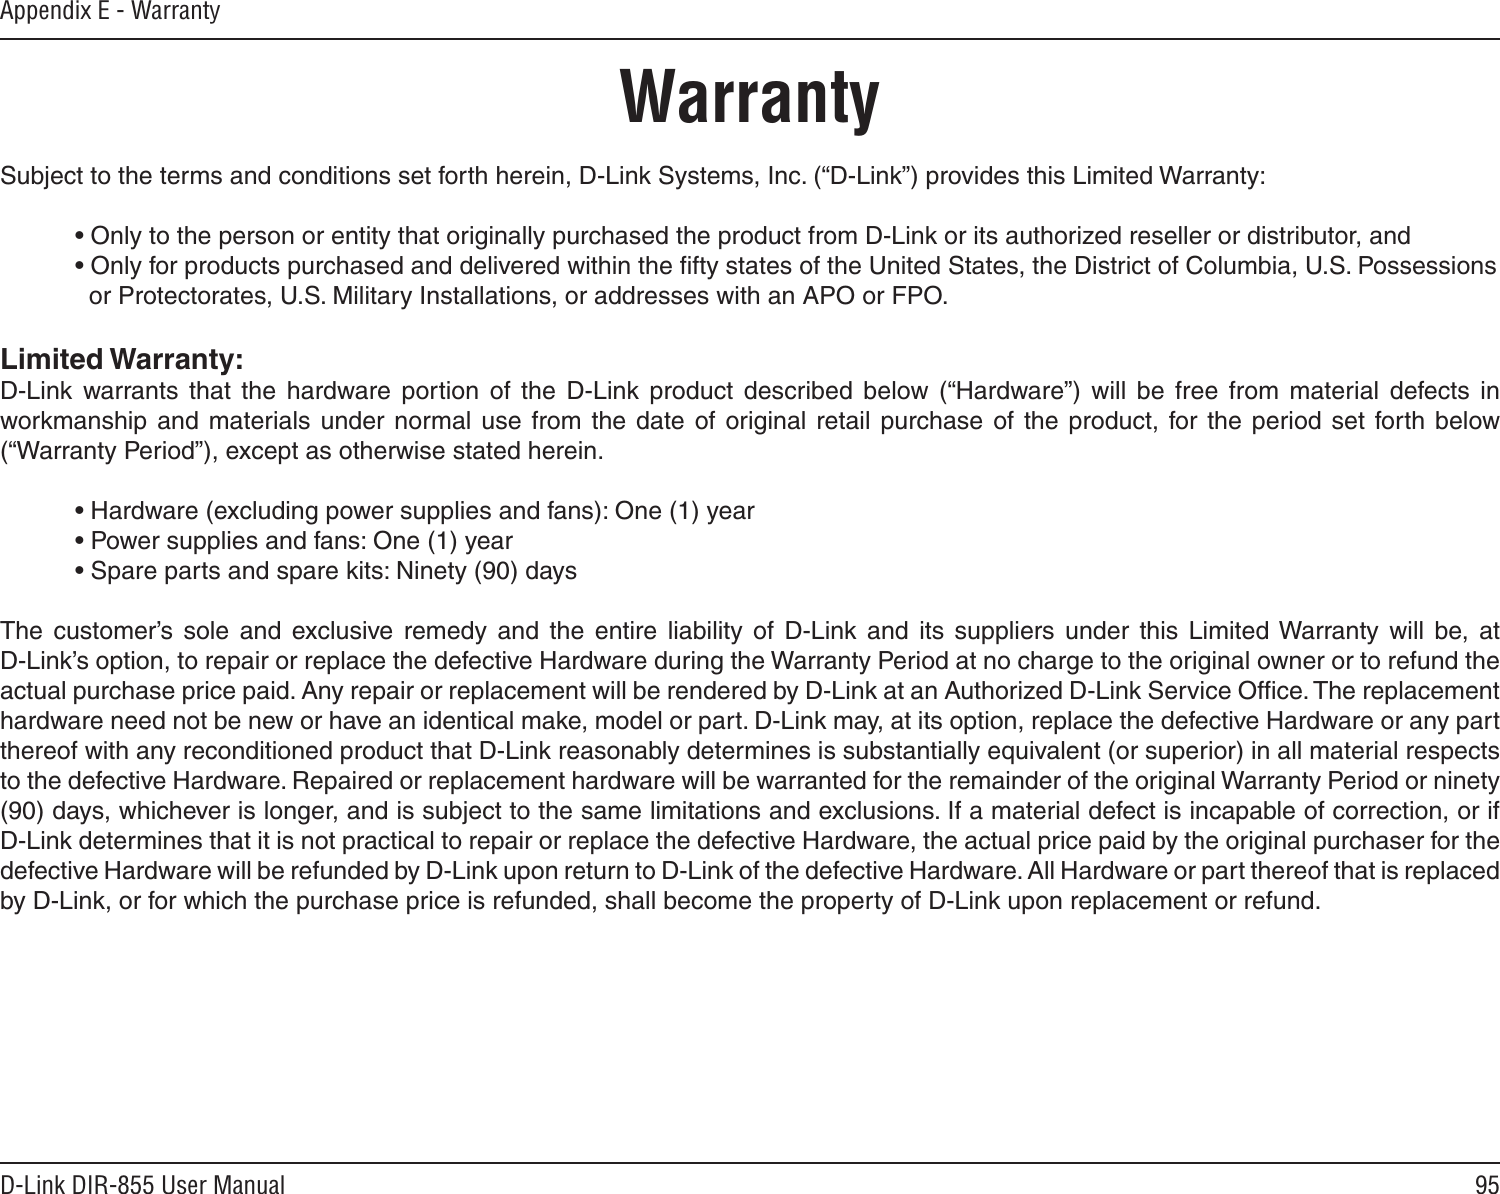 95D-Link DIR-855 User ManualAppendix E - WarrantyWarrantySubject to the terms and conditions set forth herein, D-Link Systems, Inc. (“D-Link”) provides this Limited Warranty:  • Only to the person or entity that originally purchased the product from D-Link or its authorized reseller or distributor, and  • Only for products purchased and delivered within the ﬁfty states of the United States, the District of Columbia, U.S. Possessions      or Protectorates, U.S. Military Installations, or addresses with an APO or FPO.Limited Warranty:D-Link  warrants  that  the  hardware  portion  of  the  D-Link  product  described  below  (“Hardware”)  will  be  free  from  material  defects  in workmanship  and materials  under normal  use from  the date  of original retail  purchase of  the product,  for the  period  set forth  below (“Warranty Period”), except as otherwise stated herein.  • Hardware (excluding power supplies and fans): One (1) year  • Power supplies and fans: One (1) year  • Spare parts and spare kits: Ninety (90) daysThe  customer’s  sole  and  exclusive  remedy  and  the  entire  liability  of  D-Link  and  its  suppliers  under  this  Limited Warranty  will  be,  at  D-Link’s option, to repair or replace the defective Hardware during the Warranty Period at no charge to the original owner or to refund the actual purchase price paid. Any repair or replacement will be rendered by D-Link at an Authorized D-Link Service Ofﬁce. The replacement hardware need not be new or have an identical make, model or part. D-Link may, at its option, replace the defective Hardware or any part thereof with any reconditioned product that D-Link reasonably determines is substantially equivalent (or superior) in all material respects to the defective Hardware. Repaired or replacement hardware will be warranted for the remainder of the original Warranty Period or ninety (90) days, whichever is longer, and is subject to the same limitations and exclusions. If a material defect is incapable of correction, or if D-Link determines that it is not practical to repair or replace the defective Hardware, the actual price paid by the original purchaser for the defective Hardware will be refunded by D-Link upon return to D-Link of the defective Hardware. All Hardware or part thereof that is replaced by D-Link, or for which the purchase price is refunded, shall become the property of D-Link upon replacement or refund.